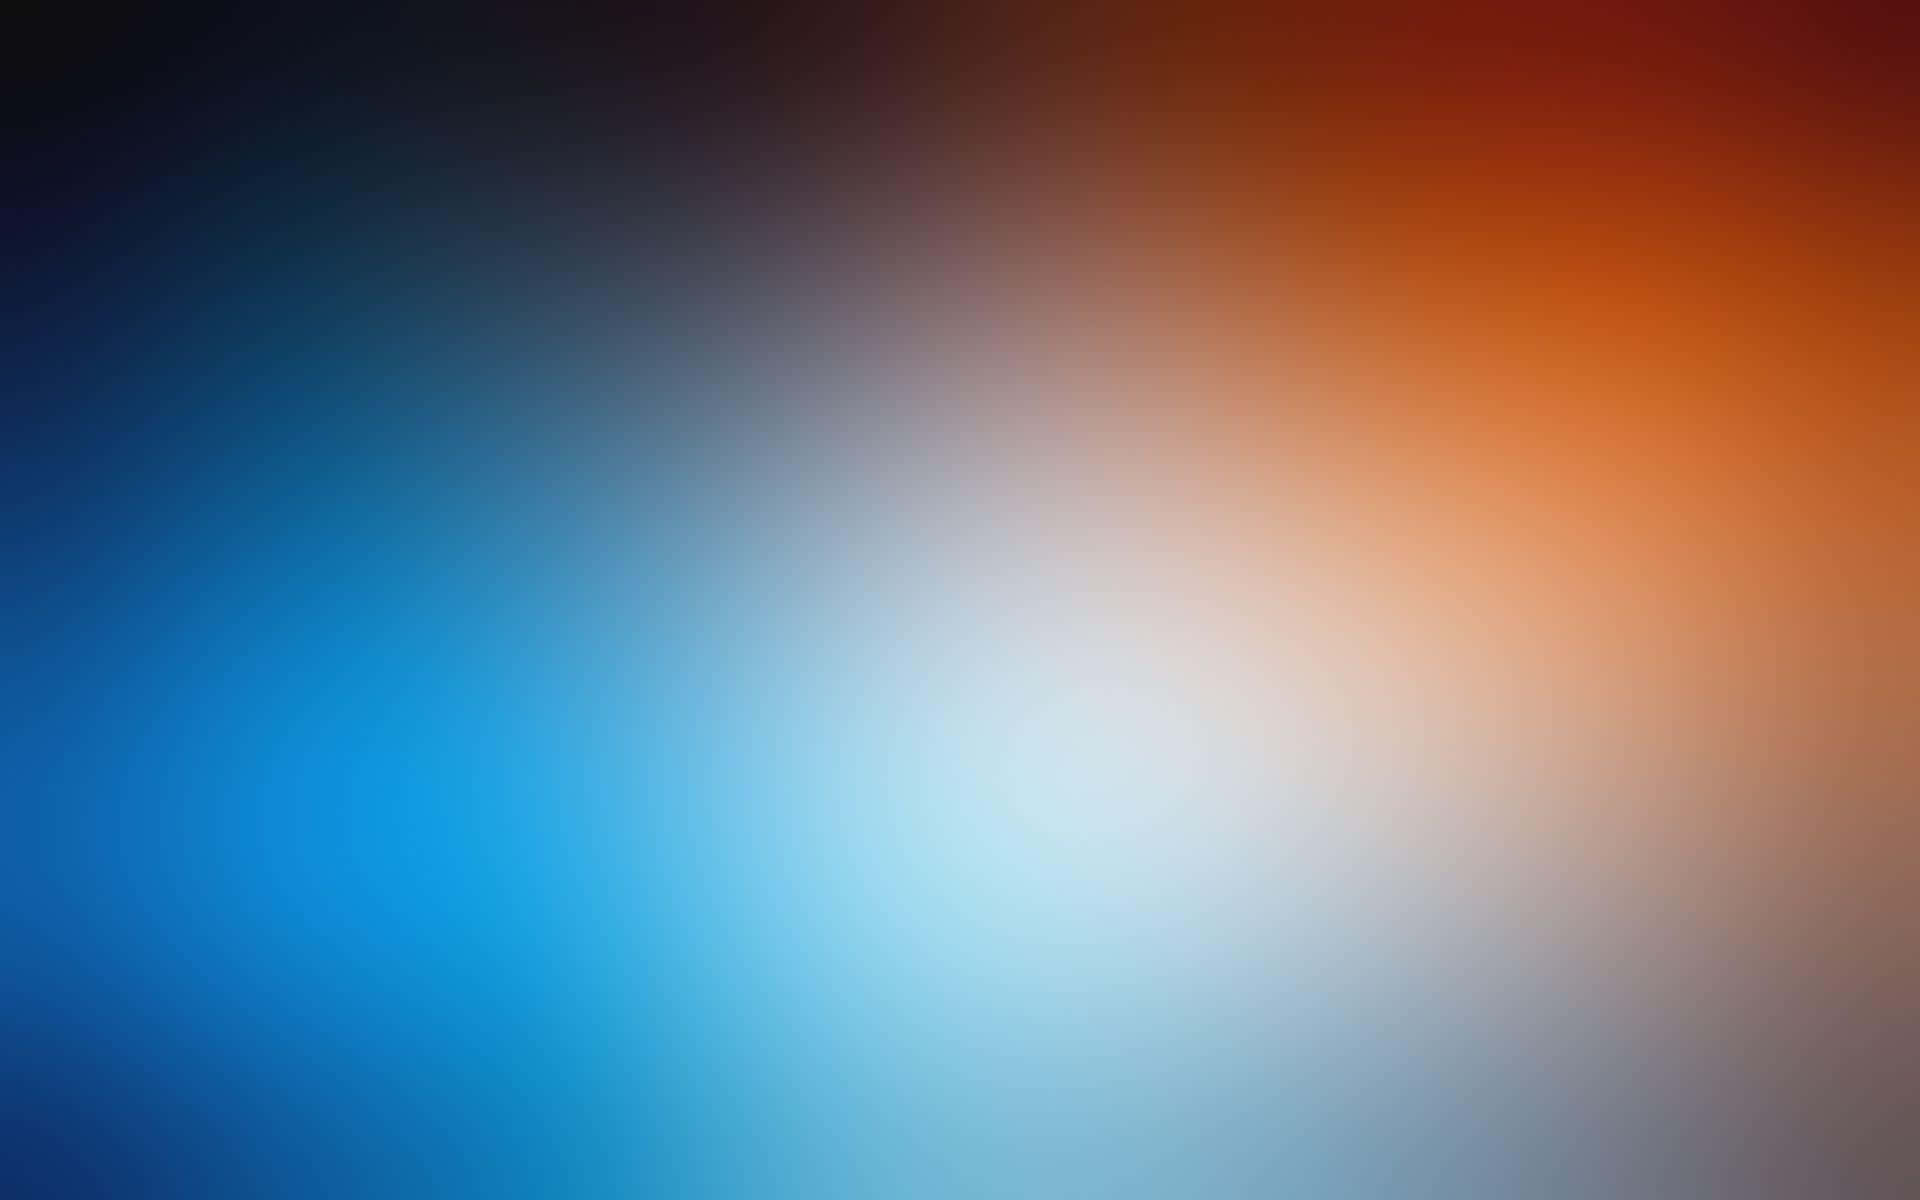 A beautiful blue and orange abstract background